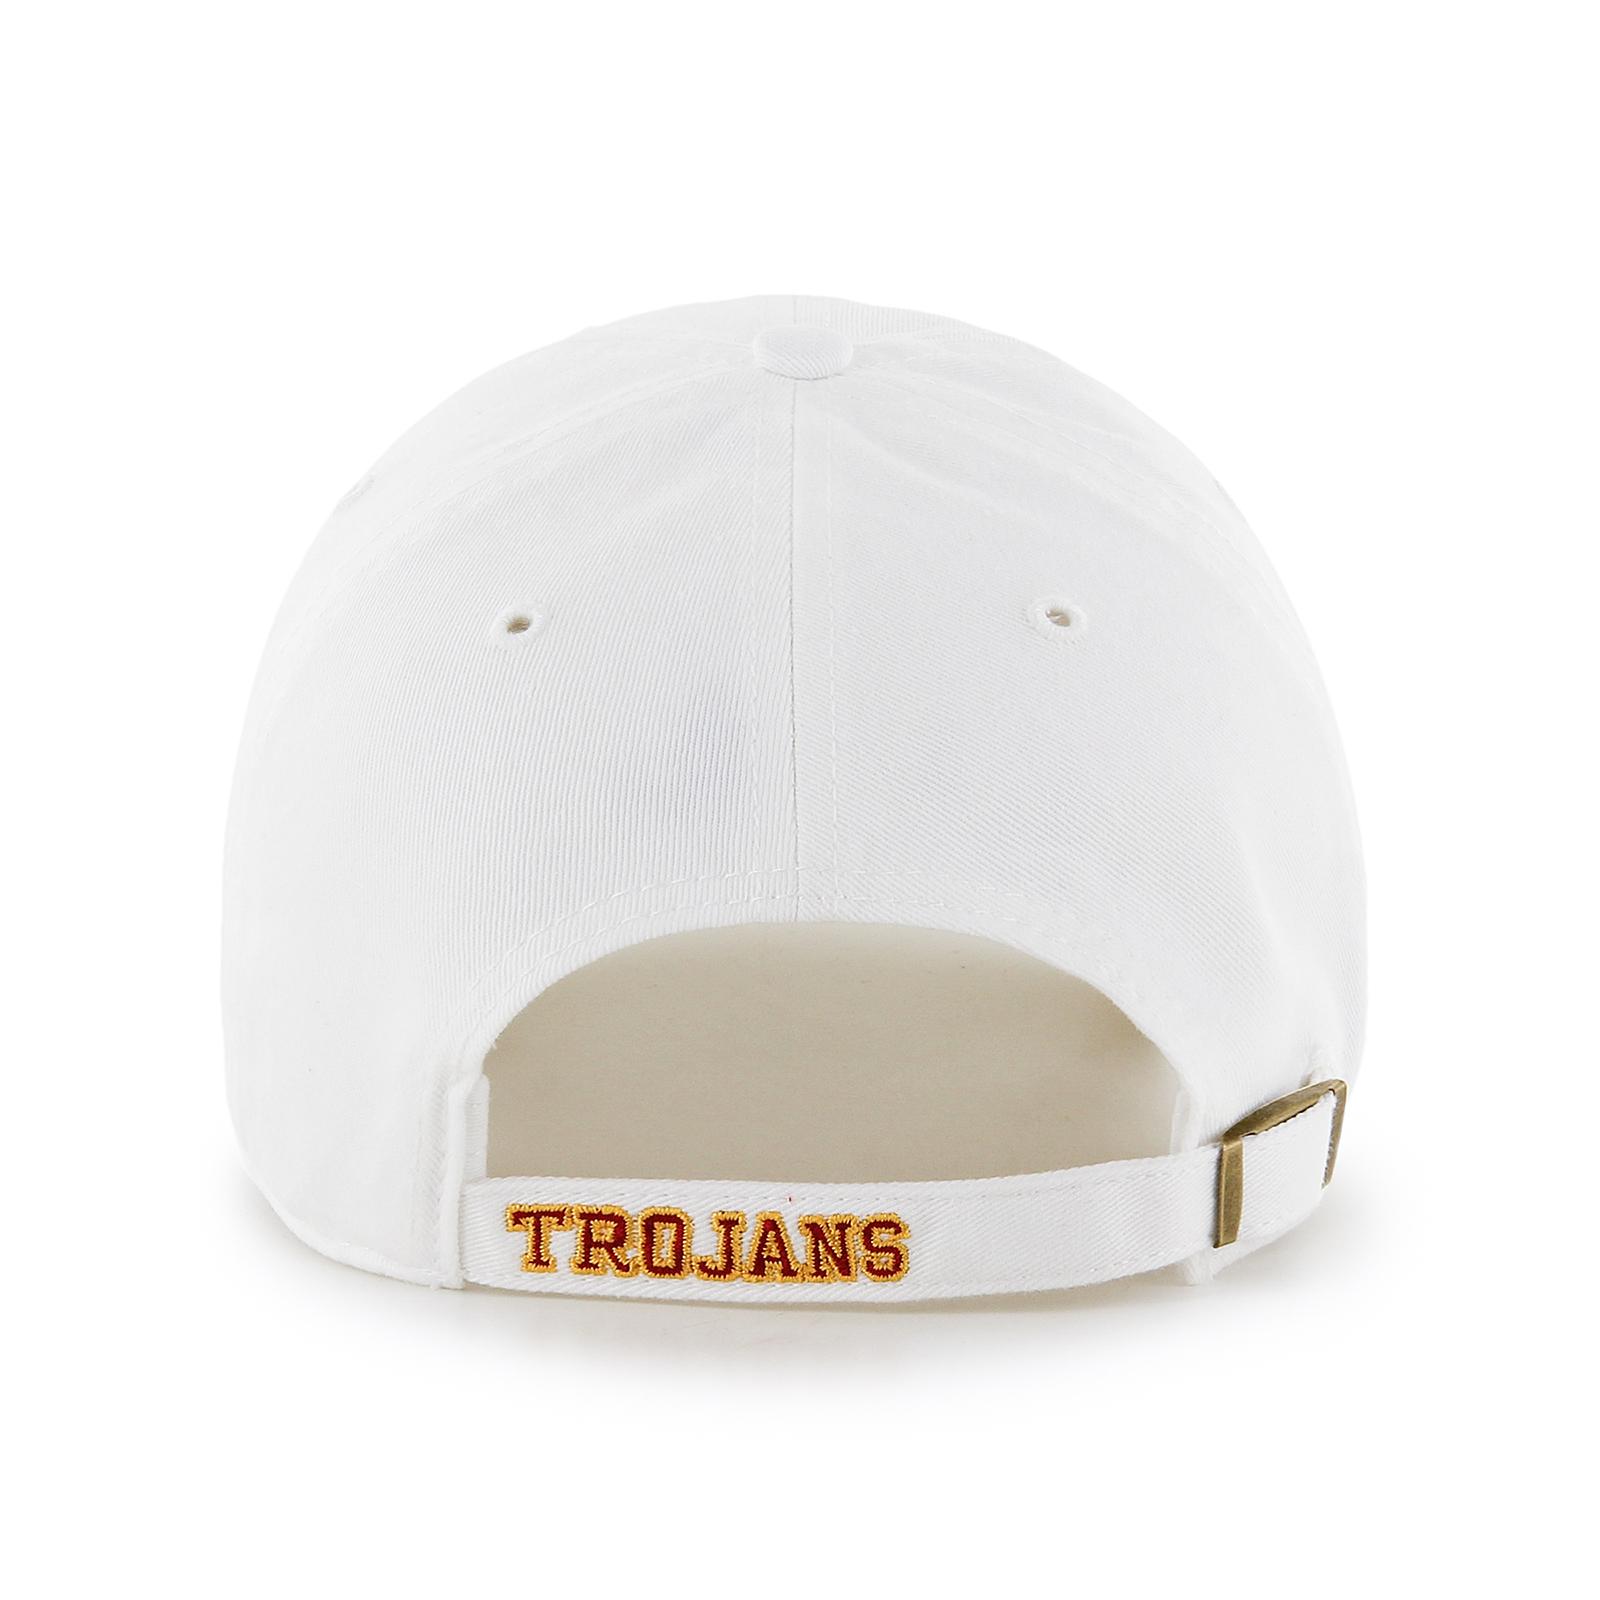 USC Arch Mens Clean Up Hat image51